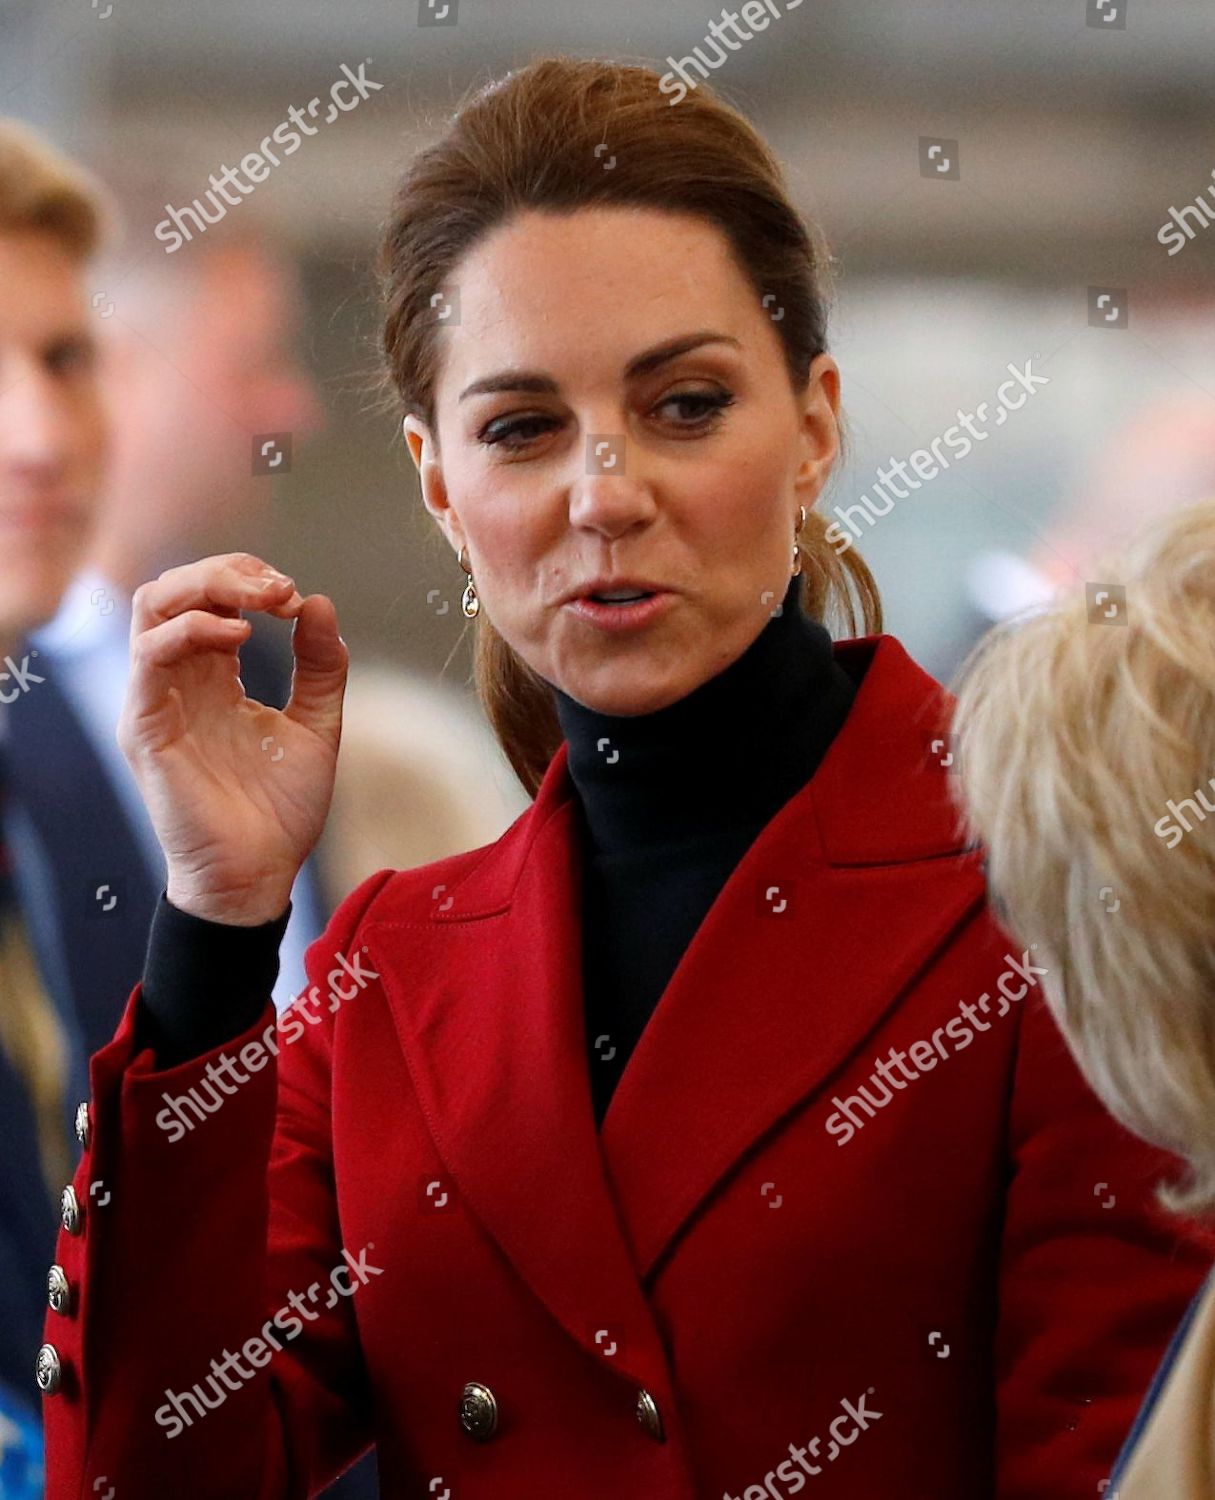 prince-william-and-catherine-duchess-of-cambridge-visit-to-wales-uk-shutterstock-editorial-10231469f.jpg